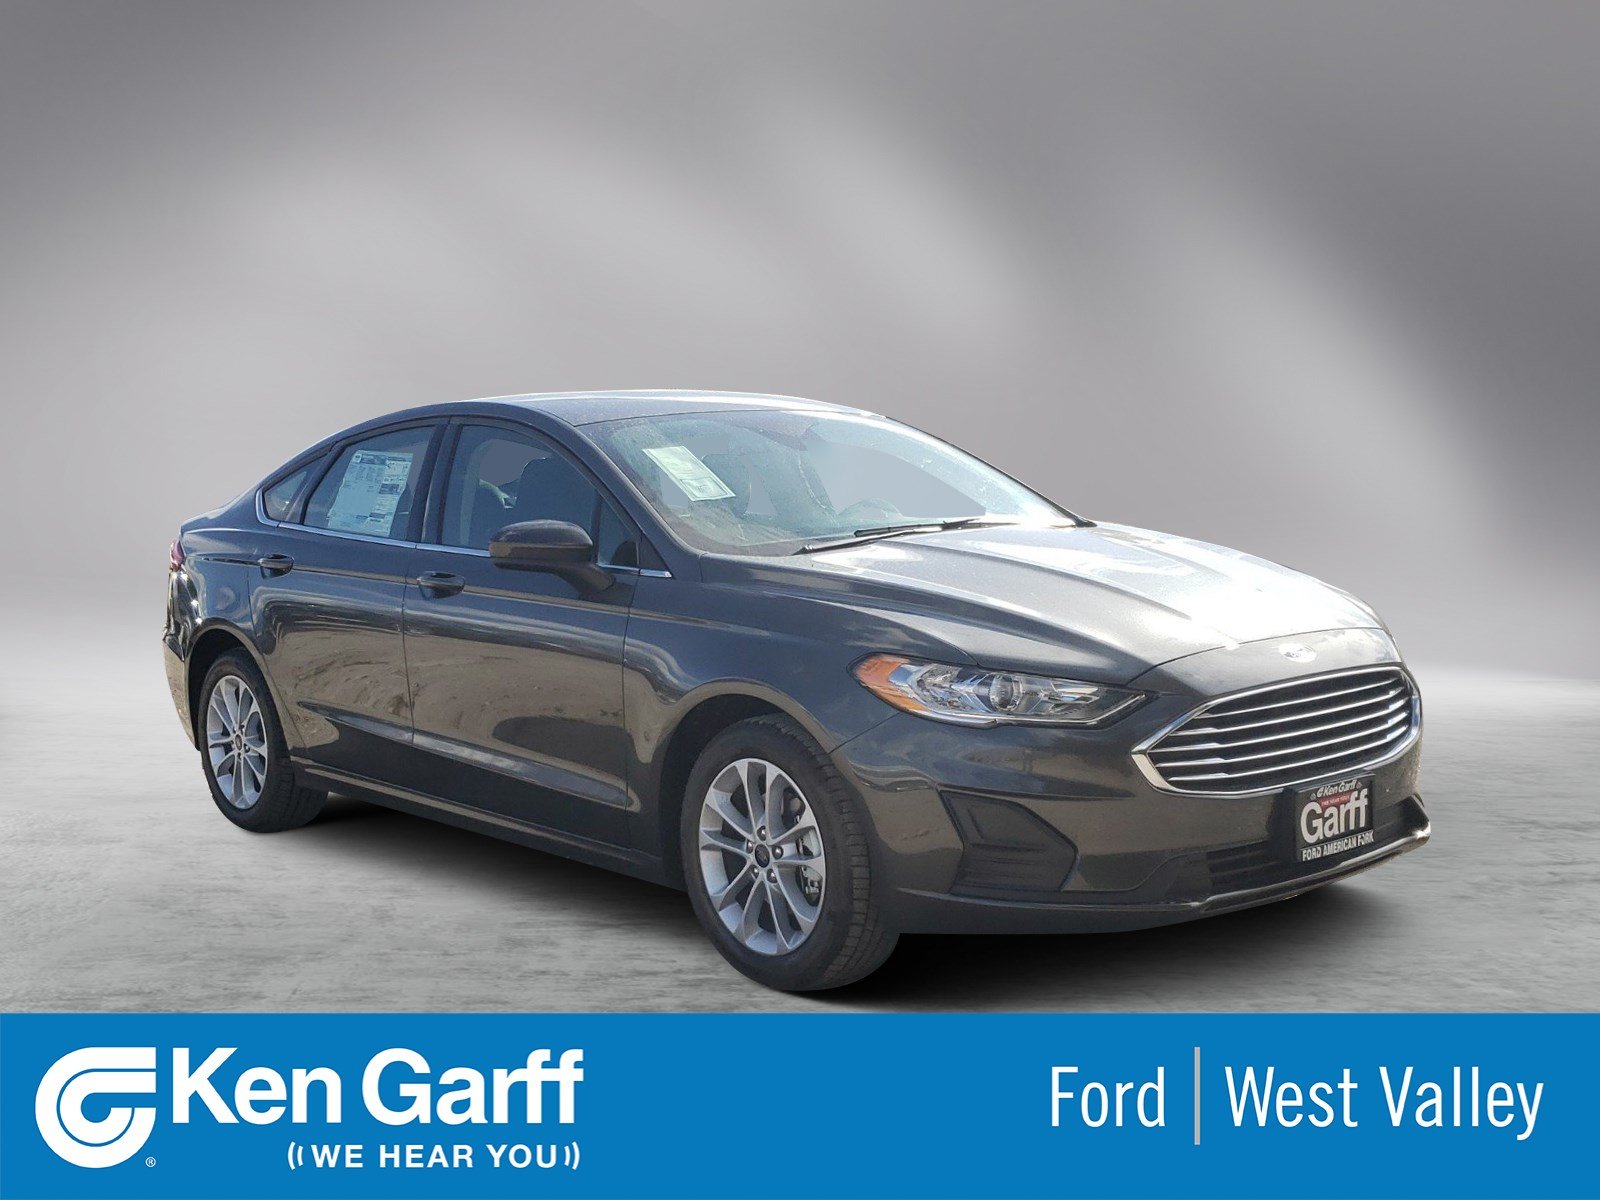 New 2020 Ford Fusion Hybrid Se With Navigation